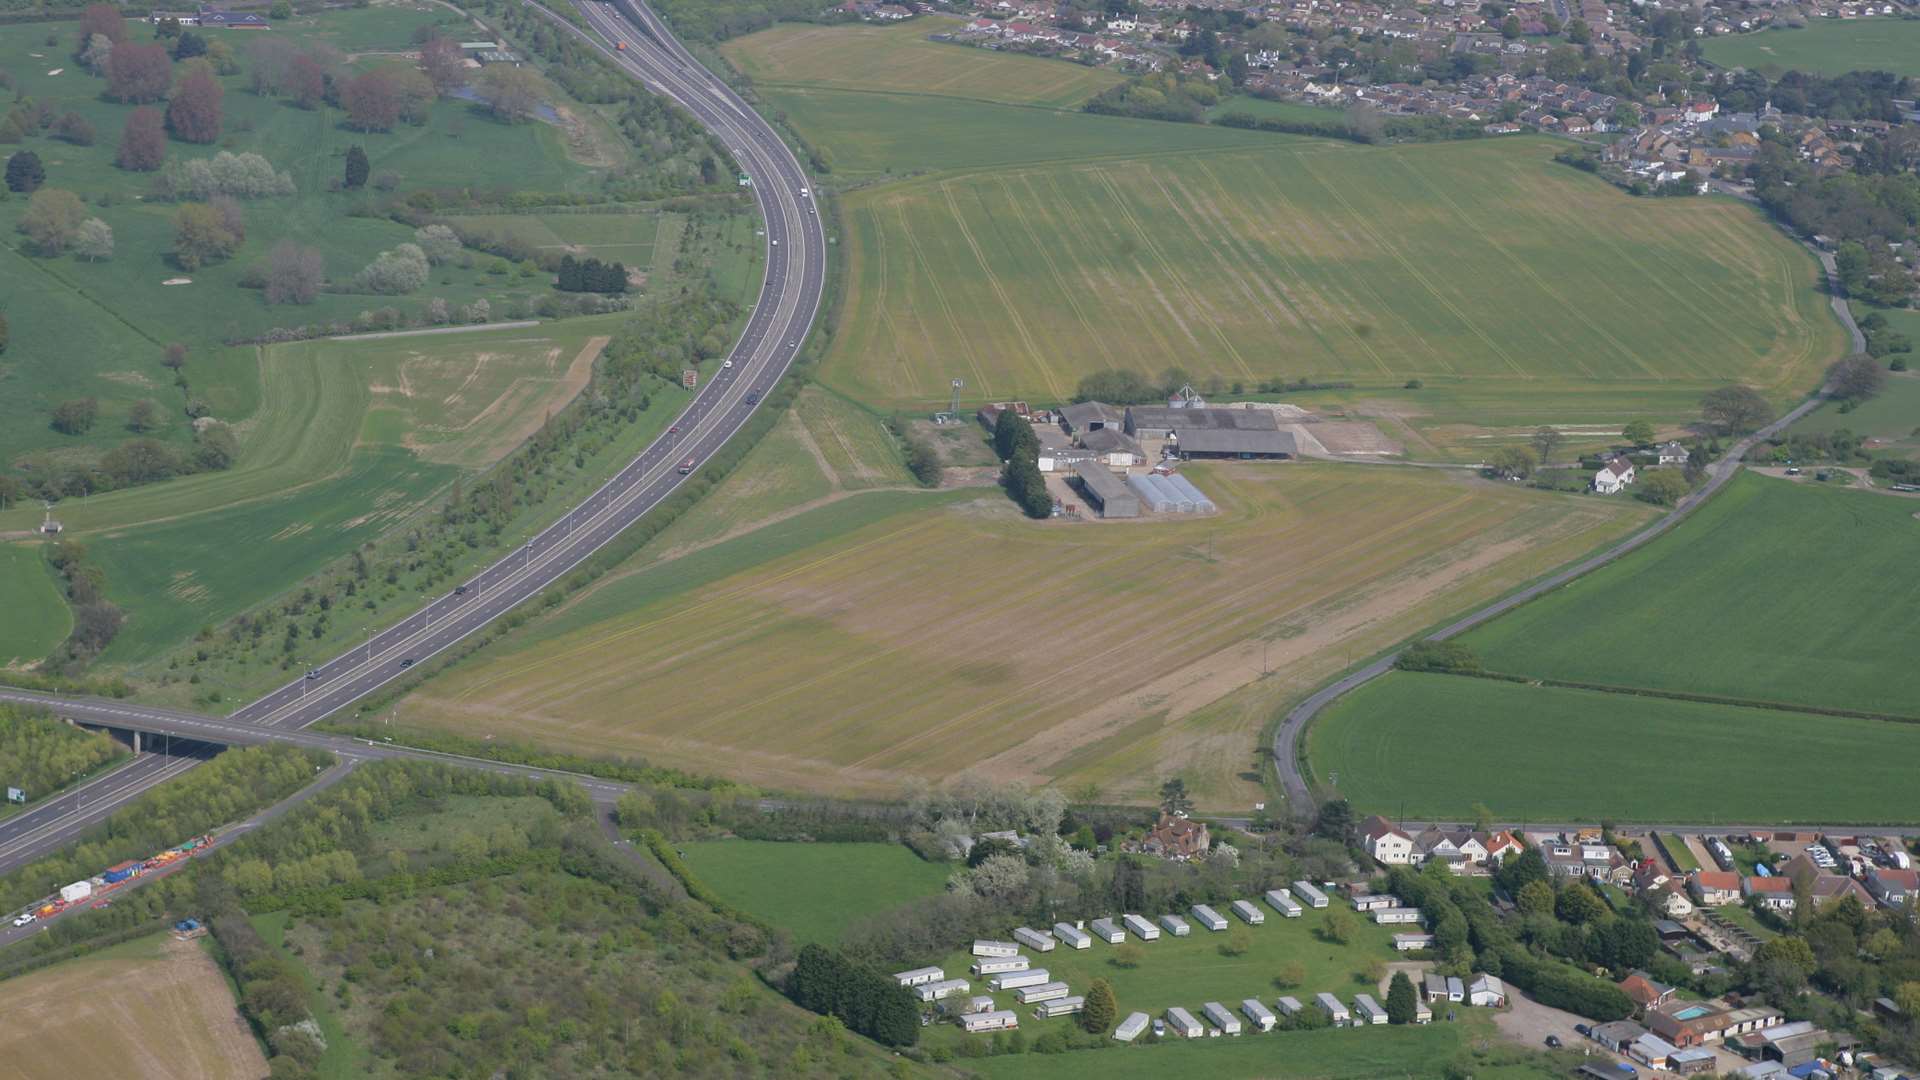 800 homes could be built at Strode Farm